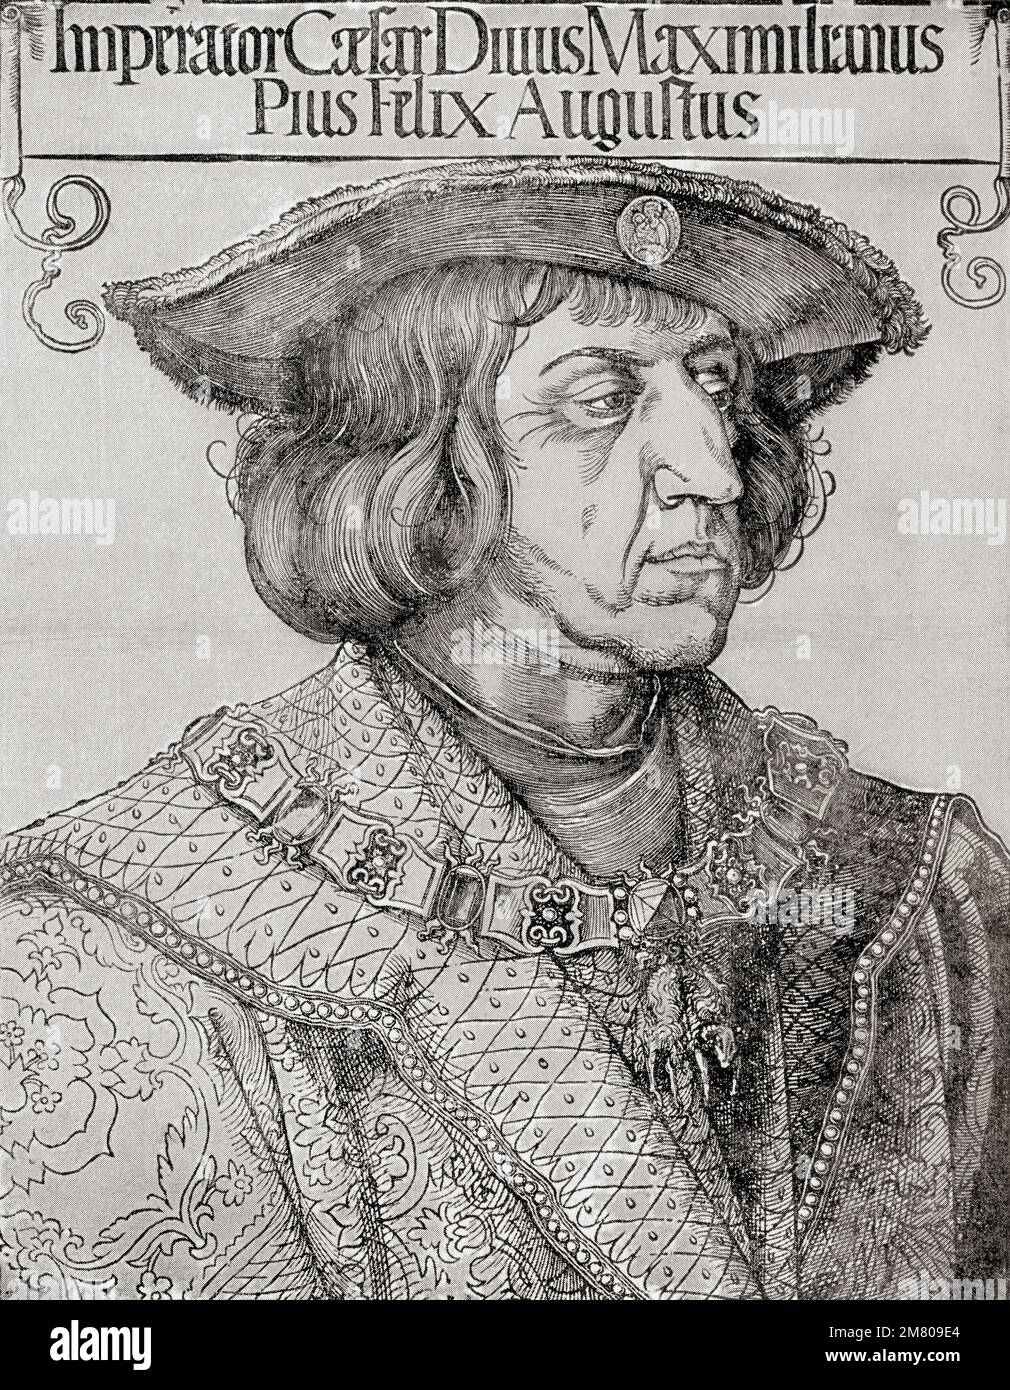 Maximilian I, 1459 – 1519.  King of the Romans from 1486 and Holy Roman Emperor from 1508 until his death, after a work by Albrecht Dürer, 1471 – 1528,  sometimes spelled in English as Dure.  German painter, printmaker, and theorist of the German Renaissance.  From Albrecht Dürer, Sein Leben und eine Auswahl seiner Werke or His life and a selection of his works, published 1928. Stock Photo